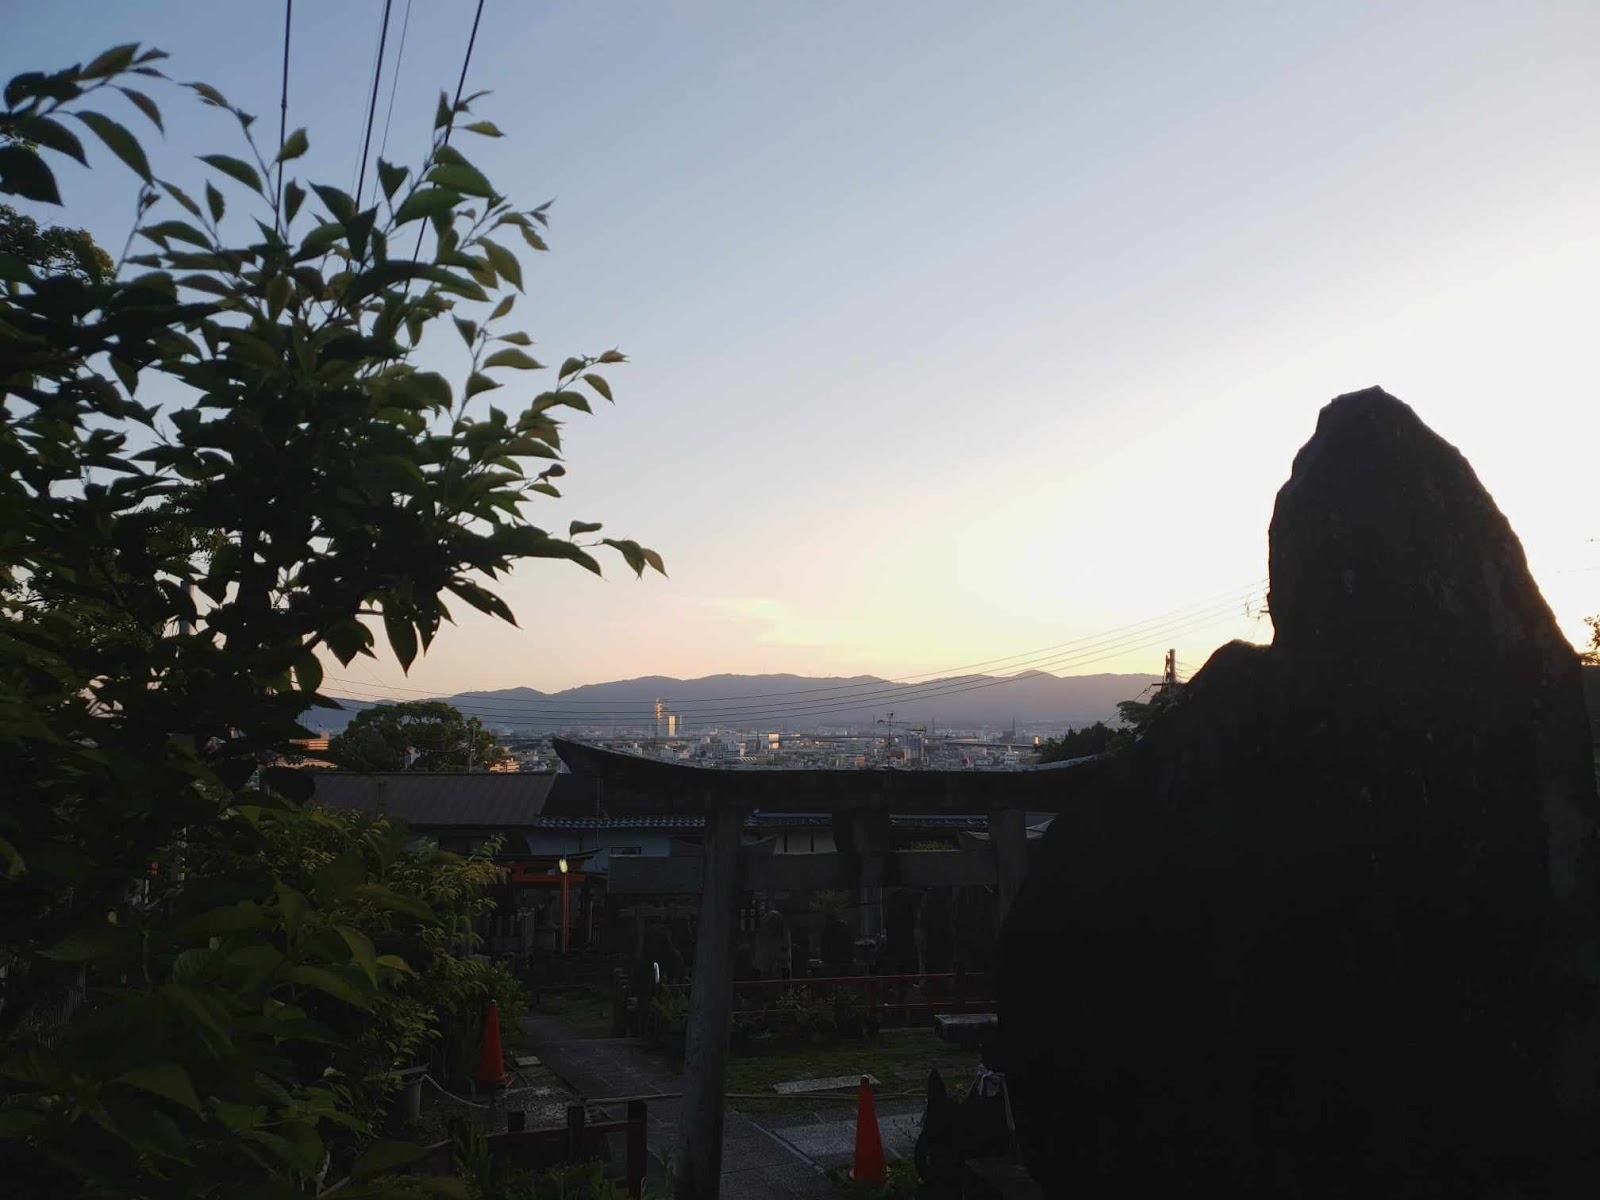 Sunset over Kyoto on descent from Fushimi Inari